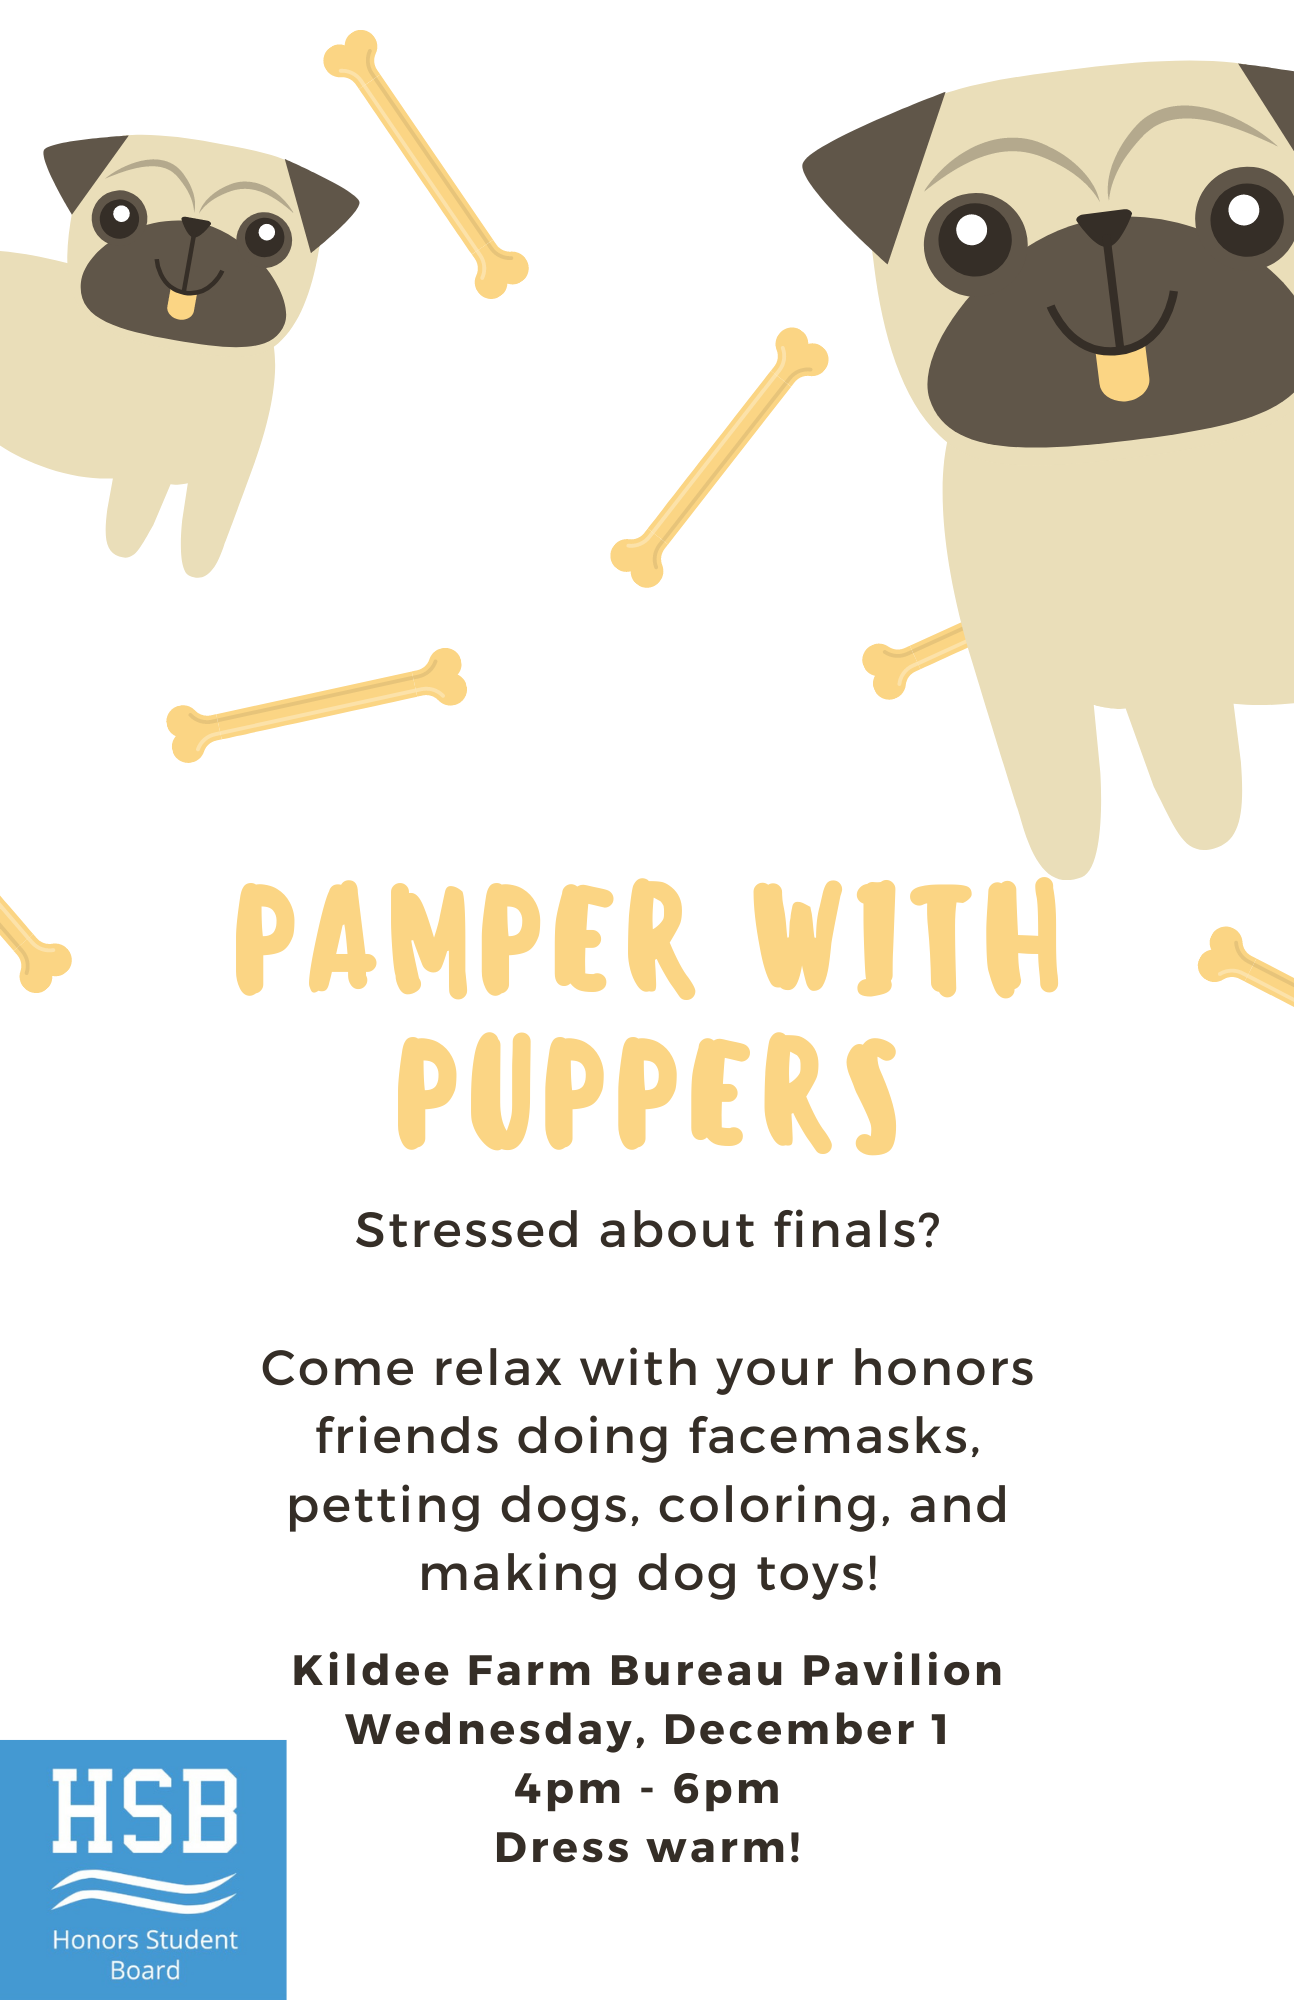 Pamper with Puppers poster